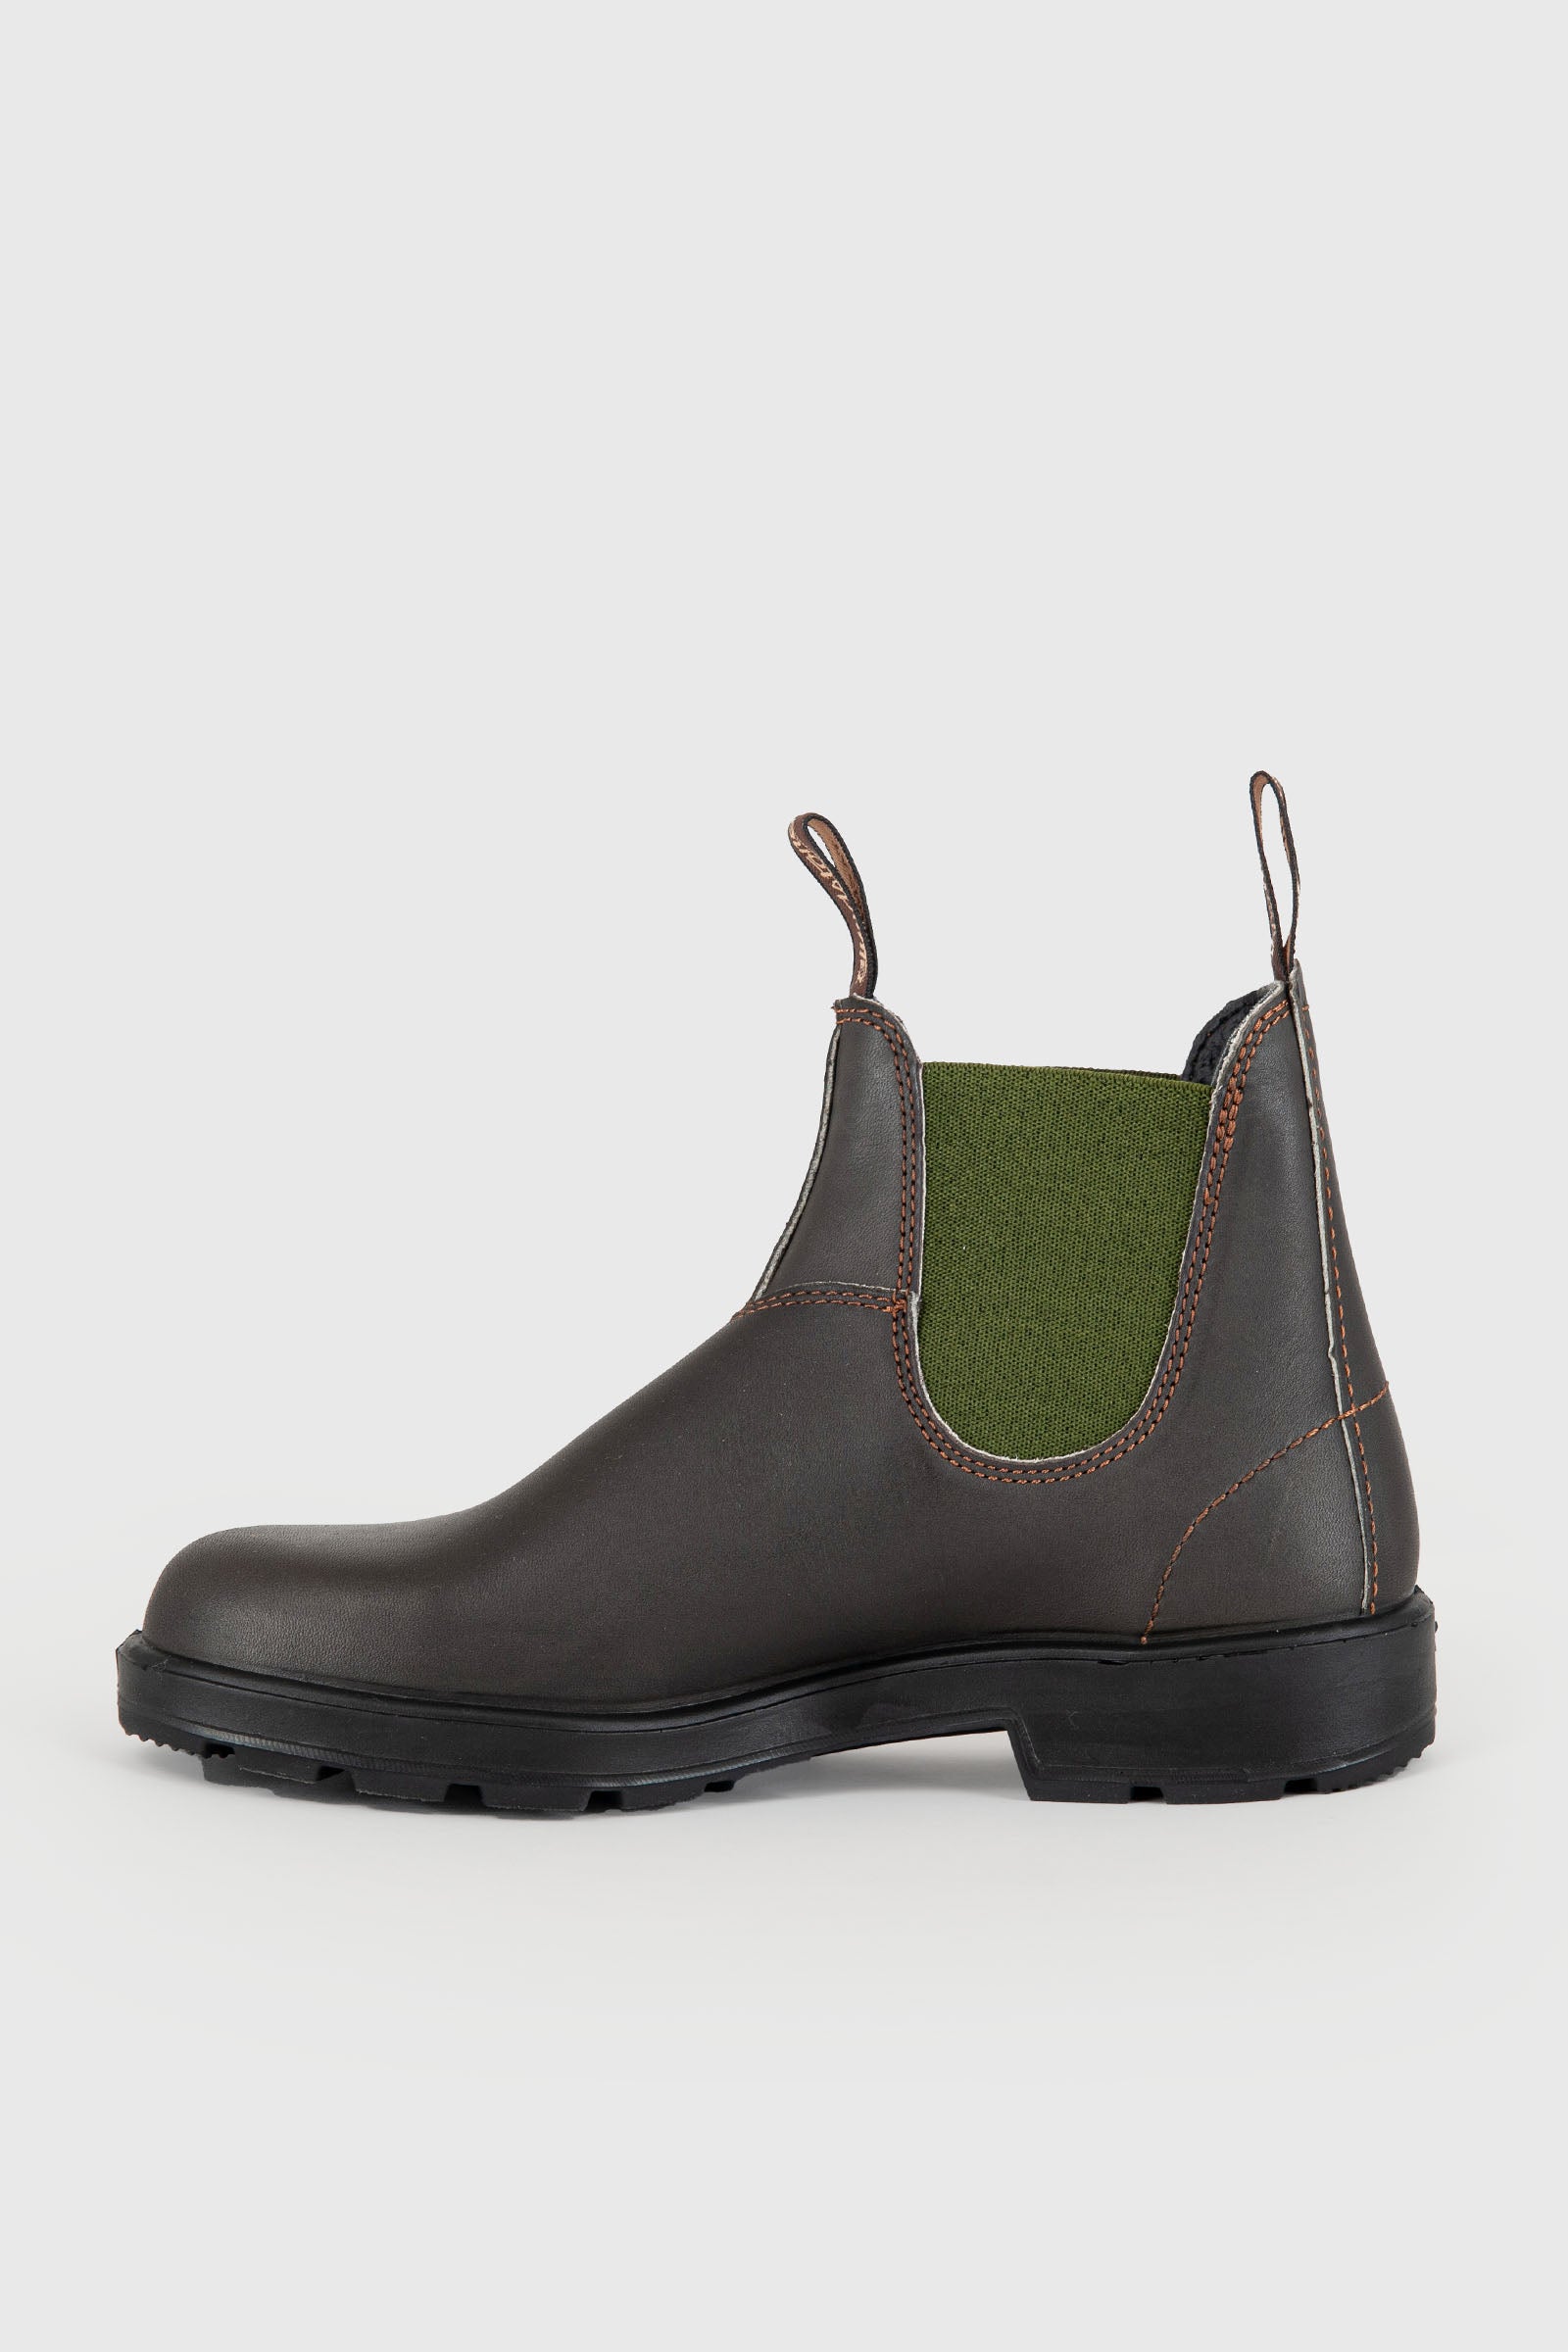 Blundstone Stivaletto Beatle 519 Pelle Stout Brown/Olive - 7